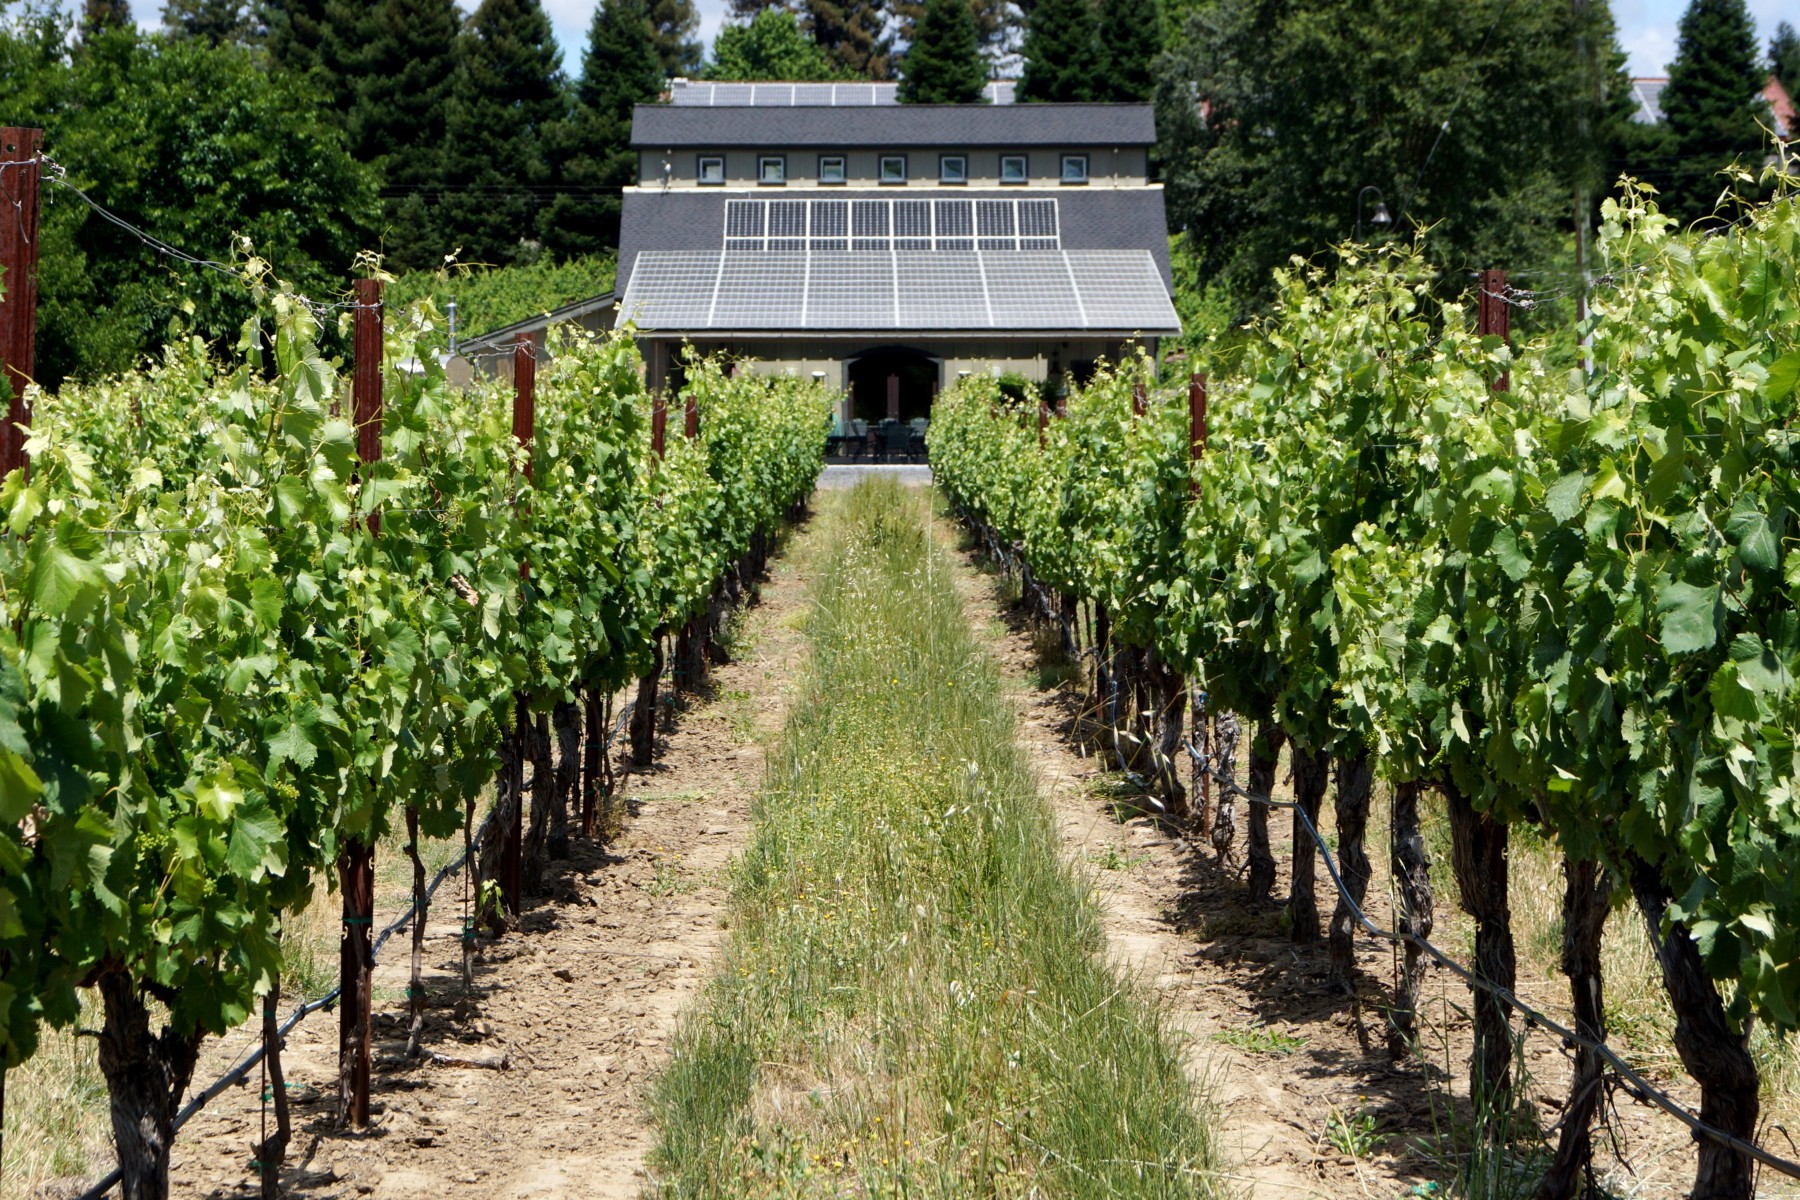 Solar Panels on Patio and Barn at Amista Vineyards